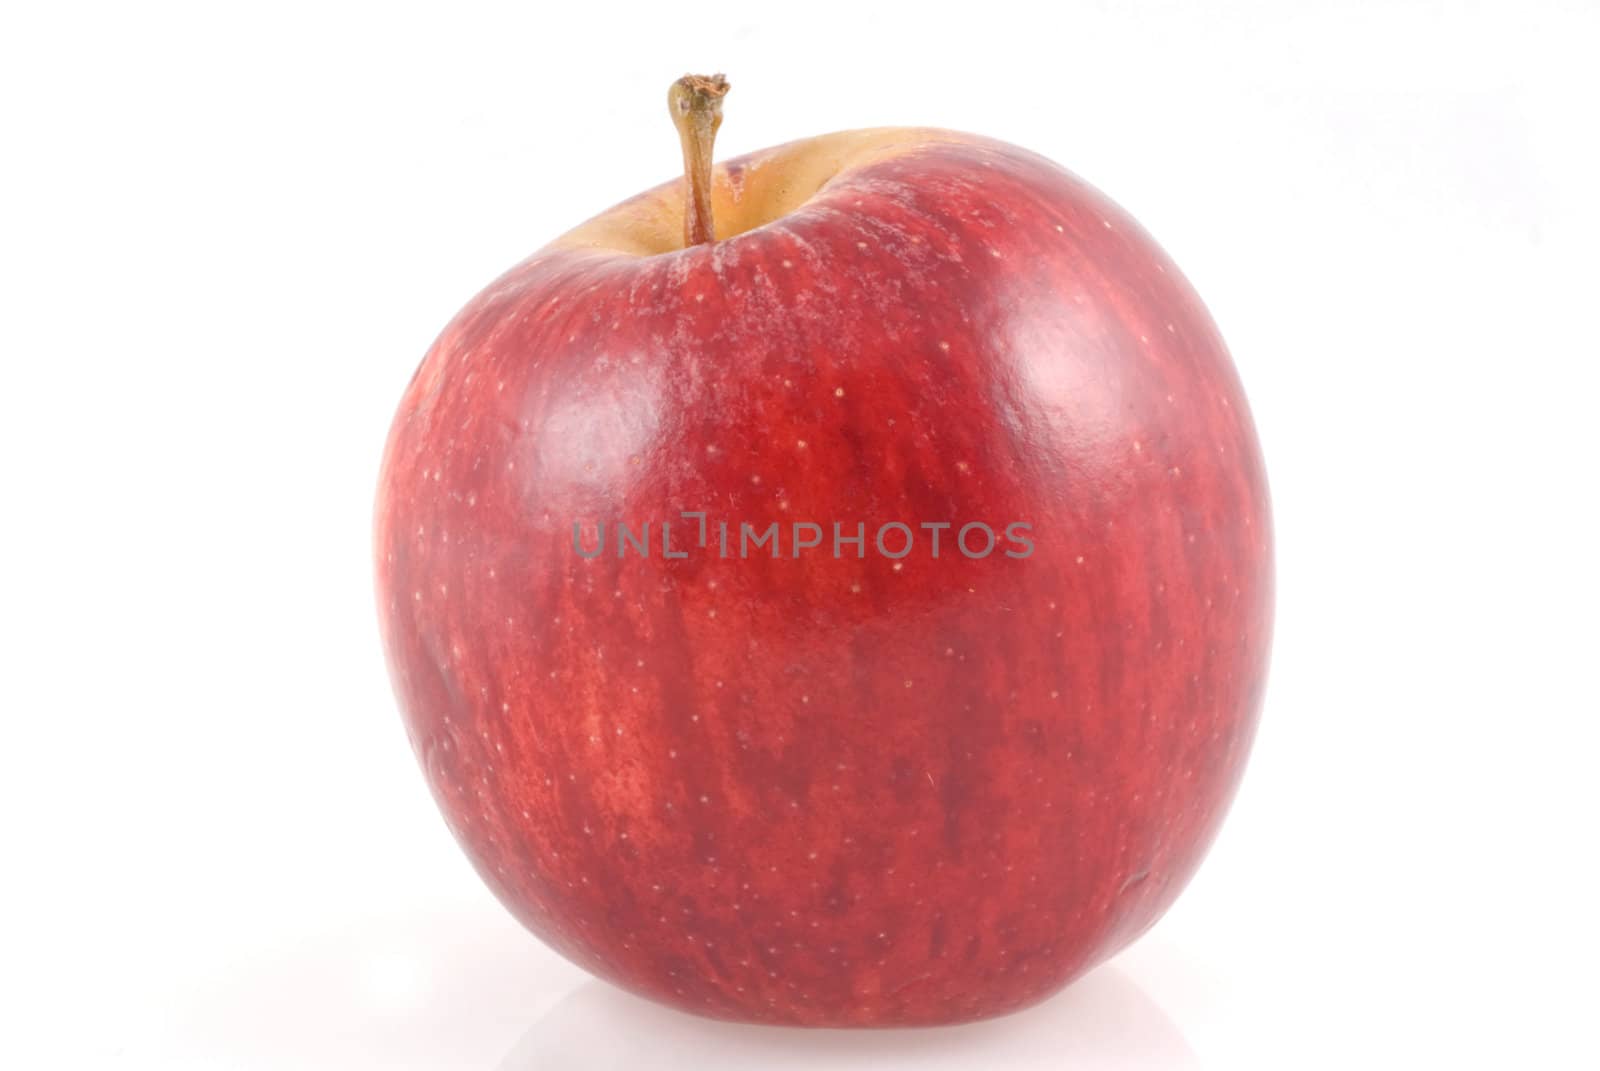 Red ripe apple isoalted on a white background.